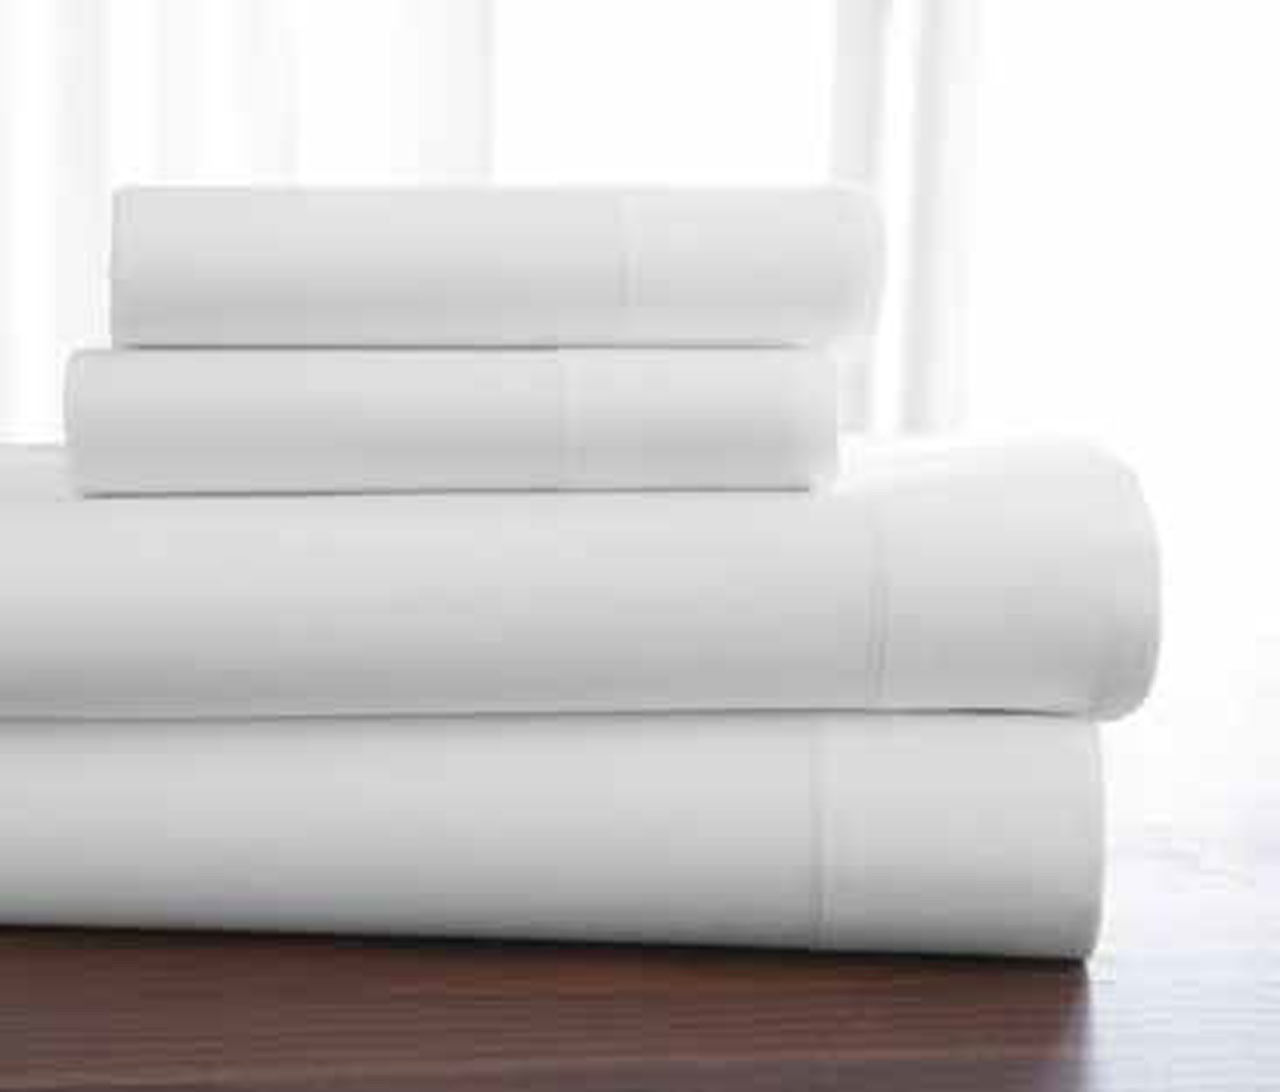 What is Welspun's reputation for its hygrocotton sheets?